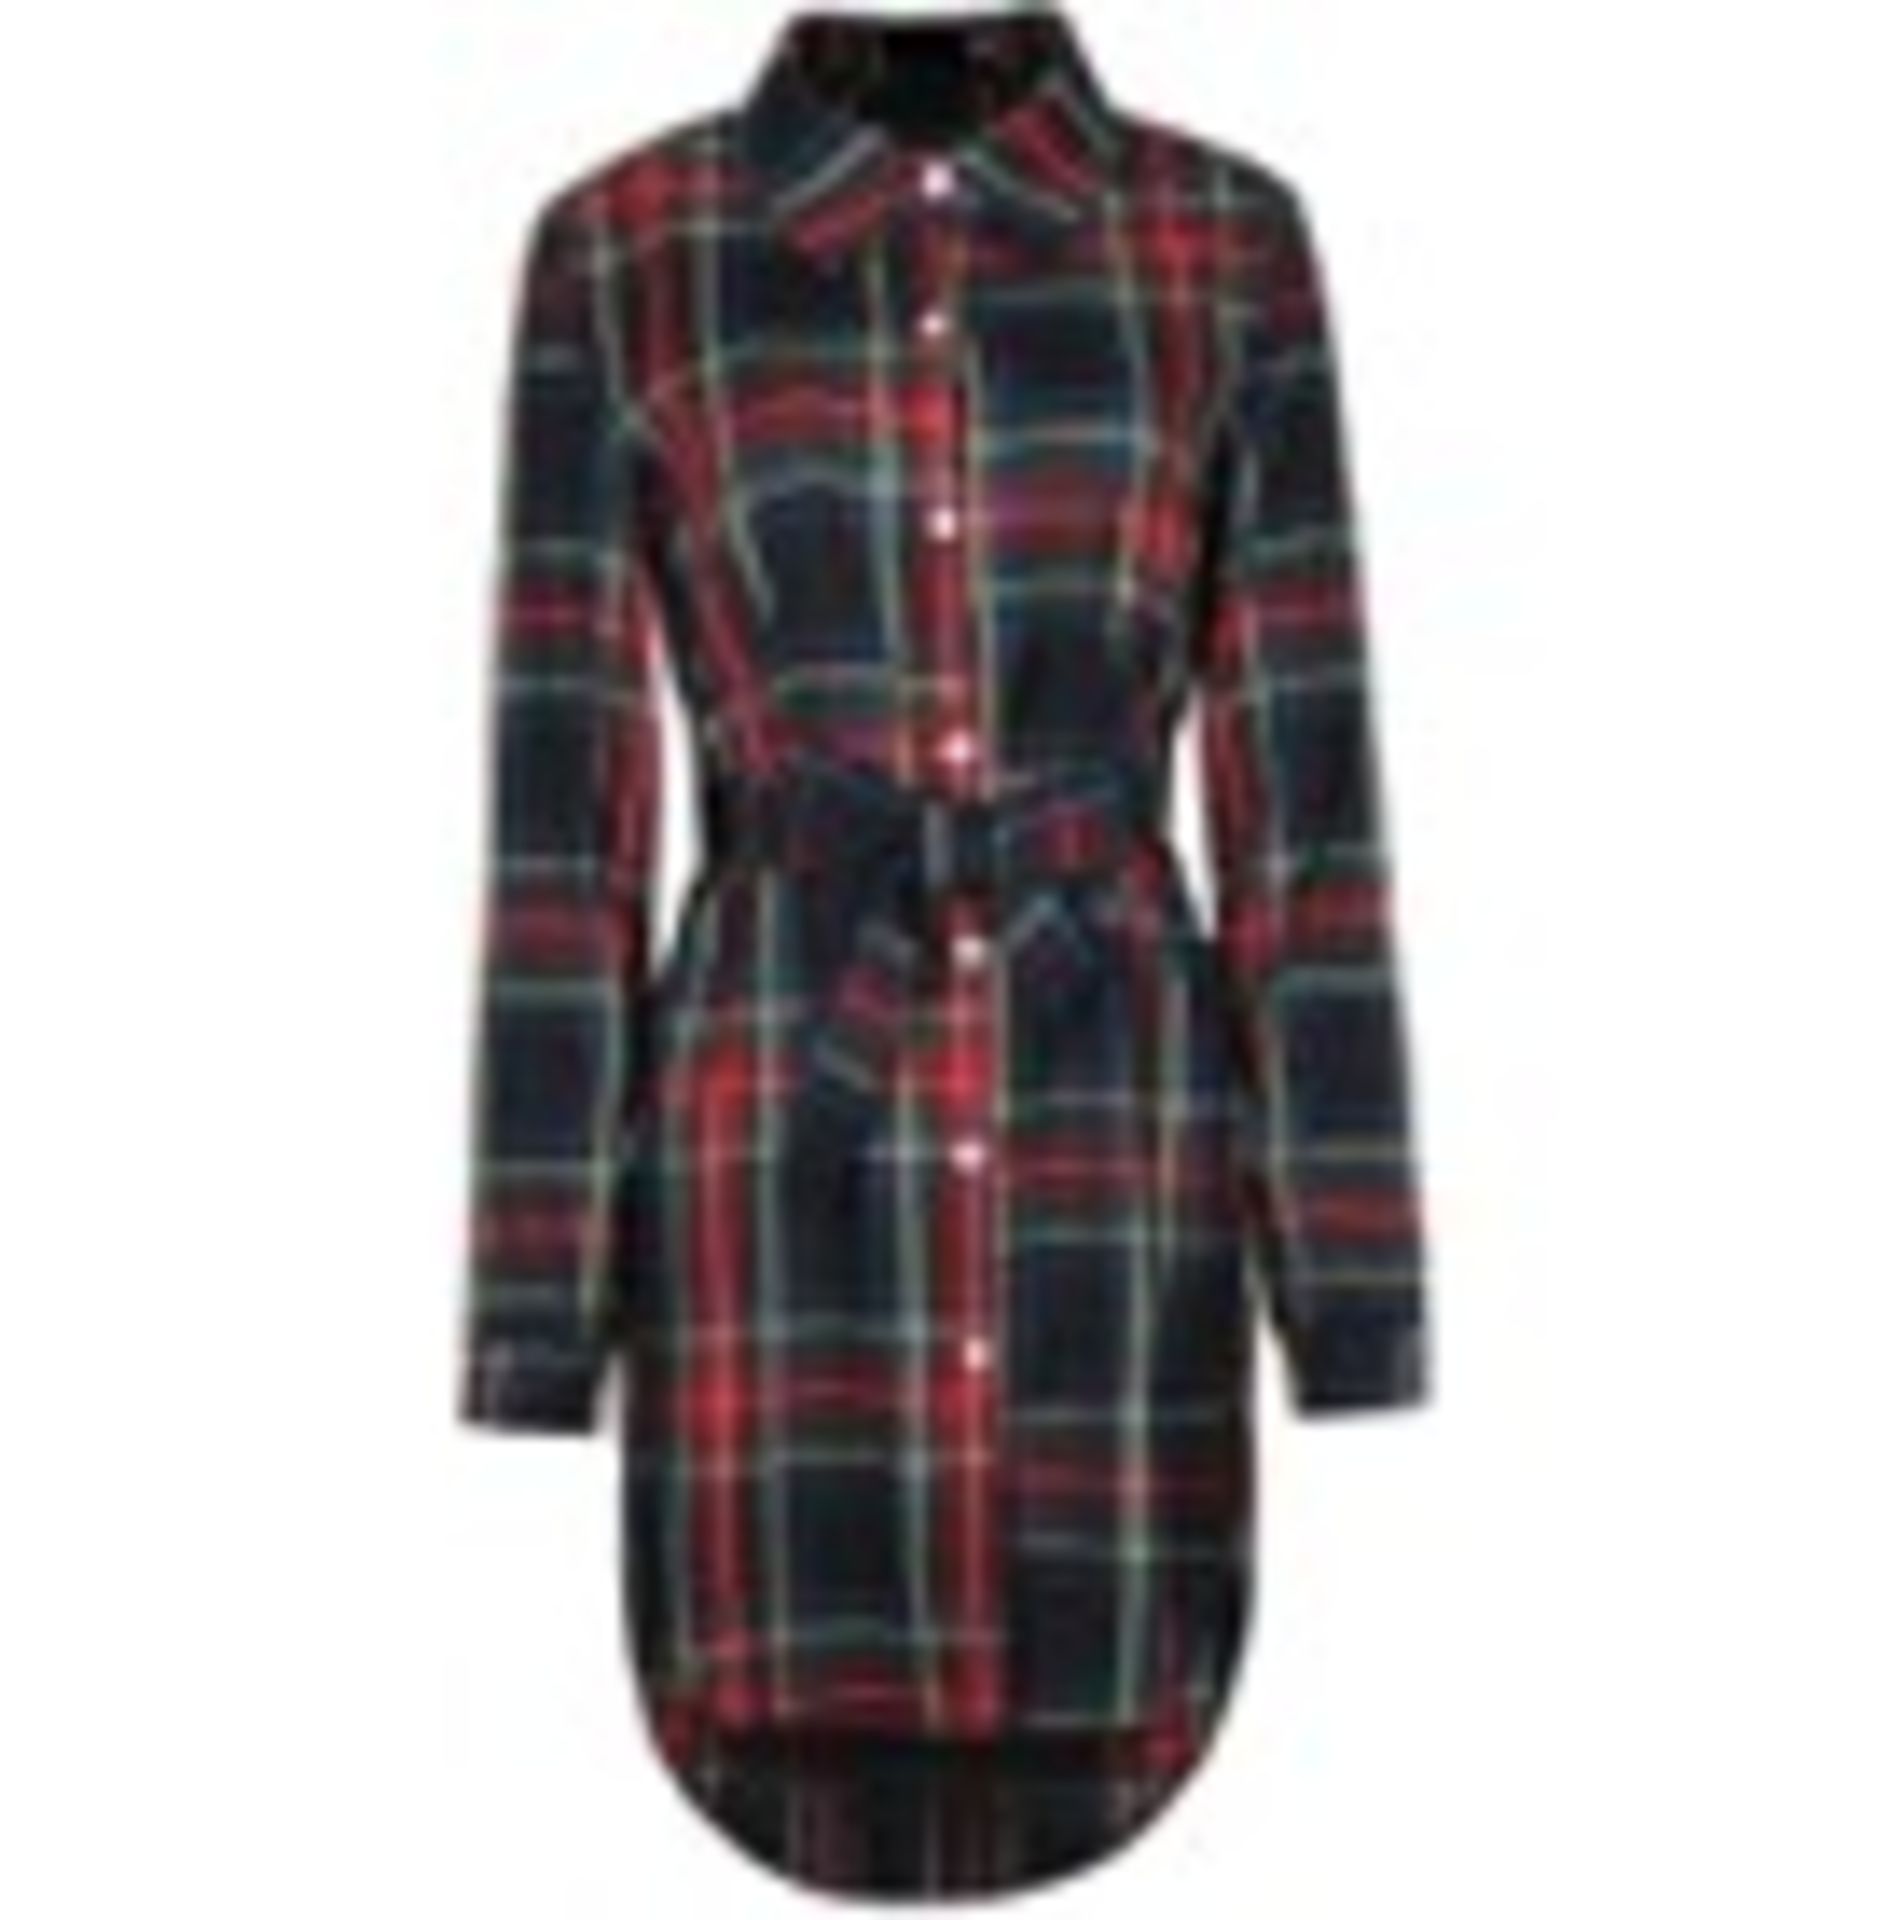 PALLET TO CONTAIN 100 PIECES OF BRAND NEW MY DRESS BOUTIQUE CLOTHING INCLUDING DRESSES, TOPS,